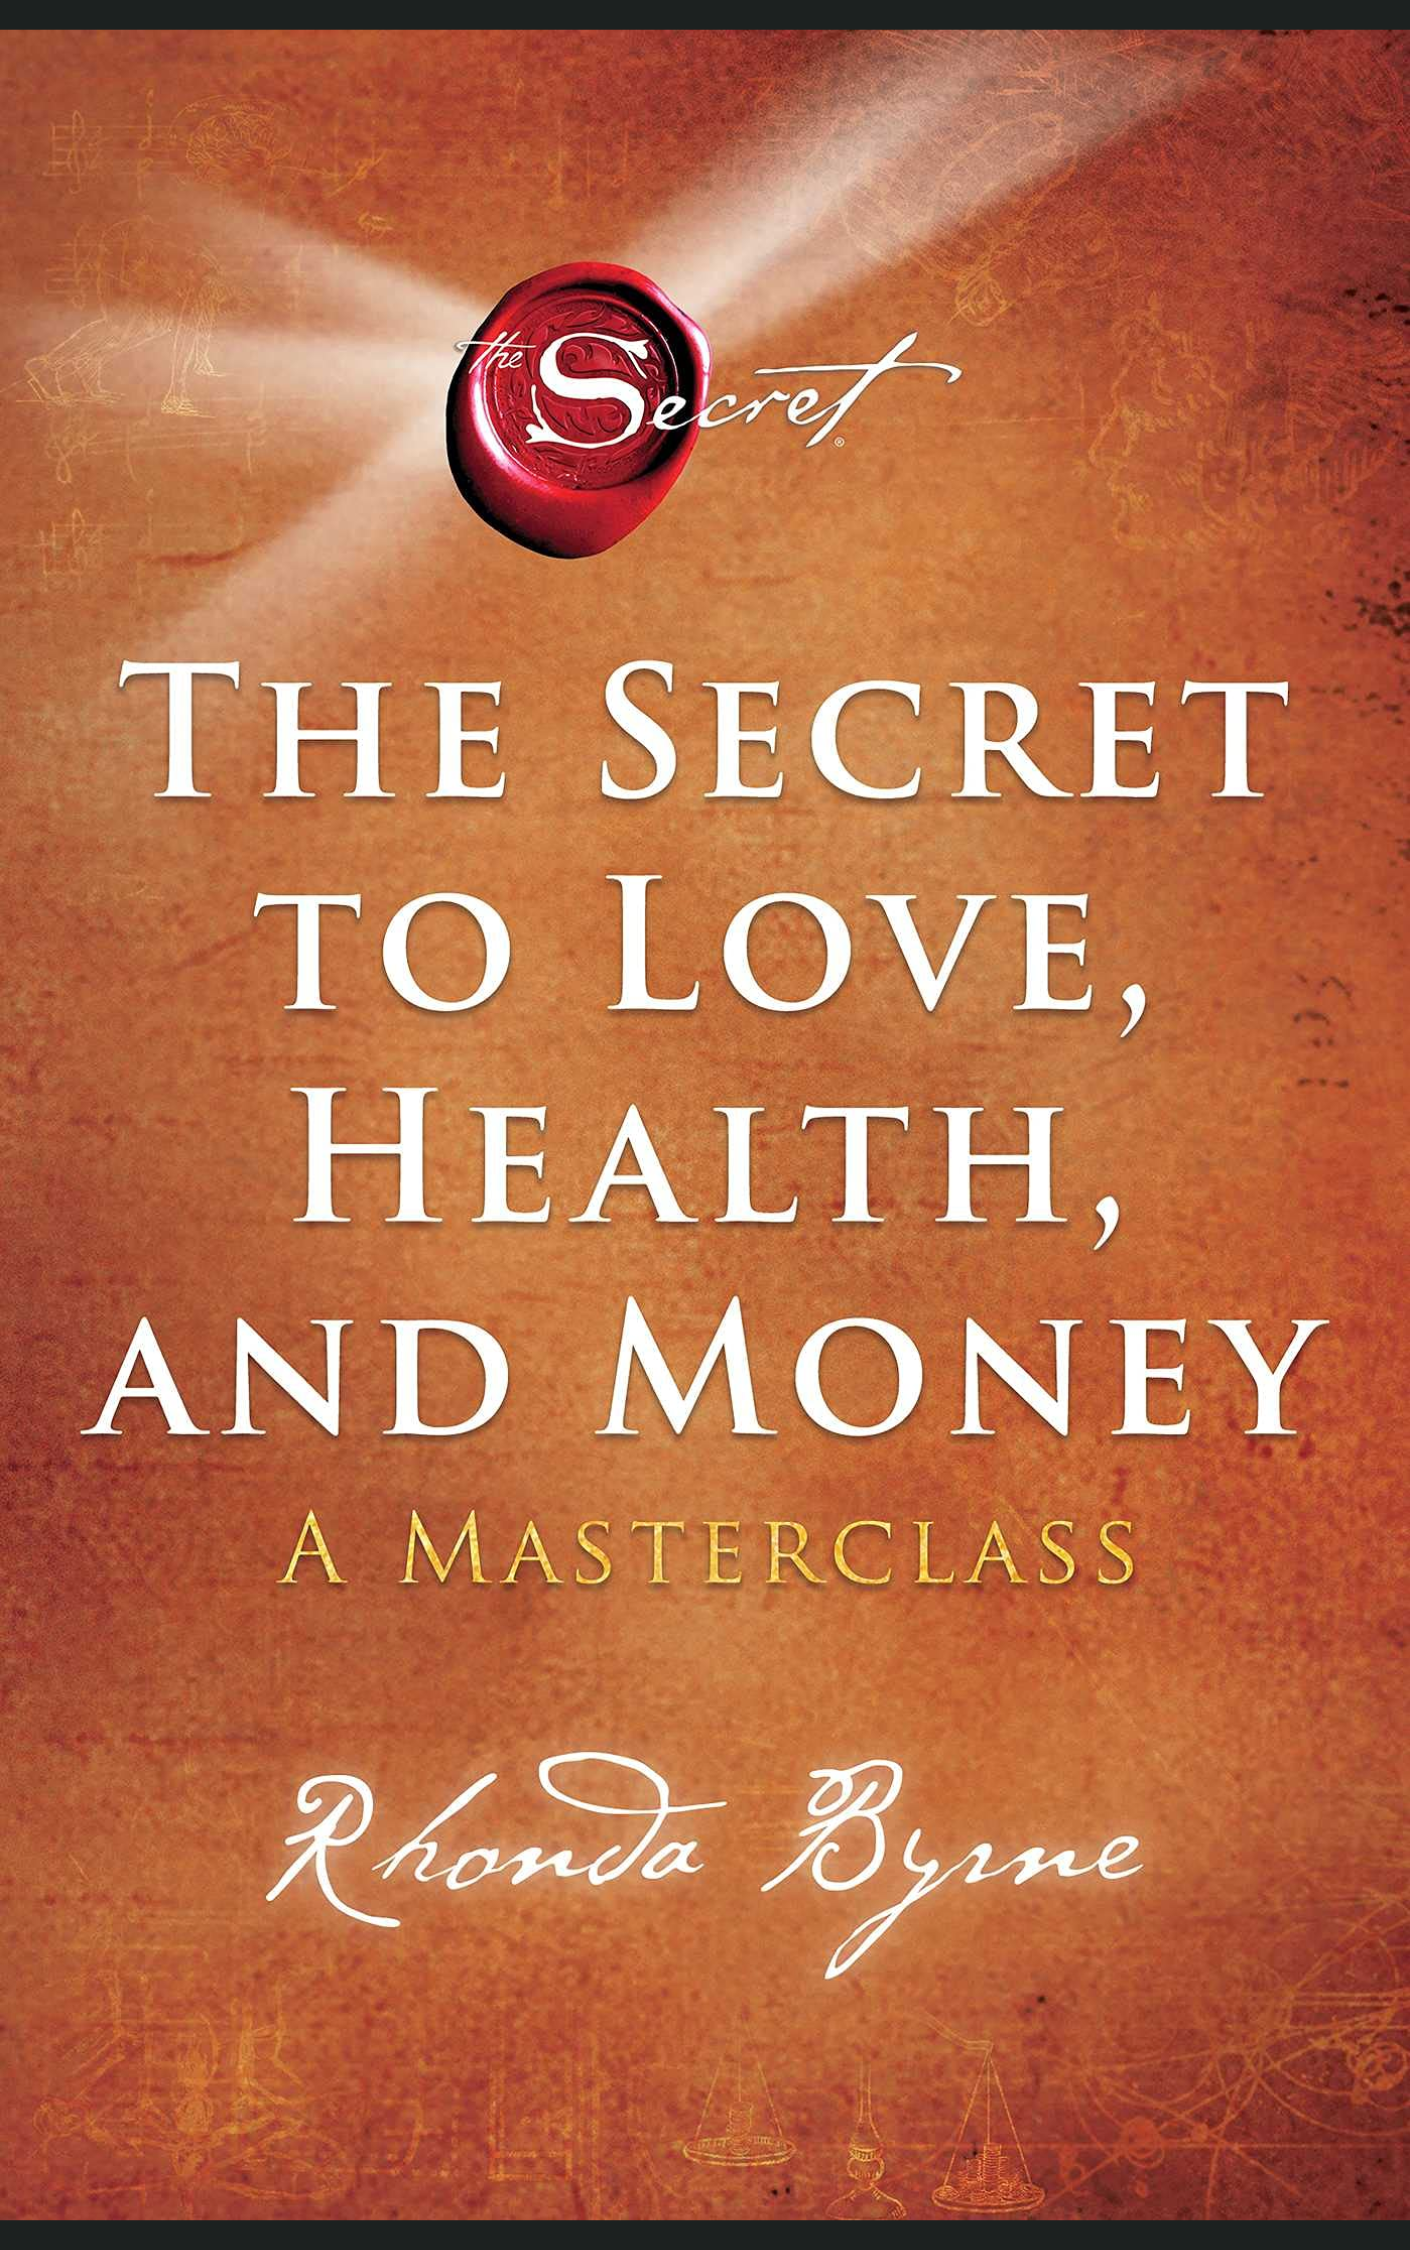 THE SECRET TO LOVE, HEALTH, AND MONEY by RHONDA BYRNE